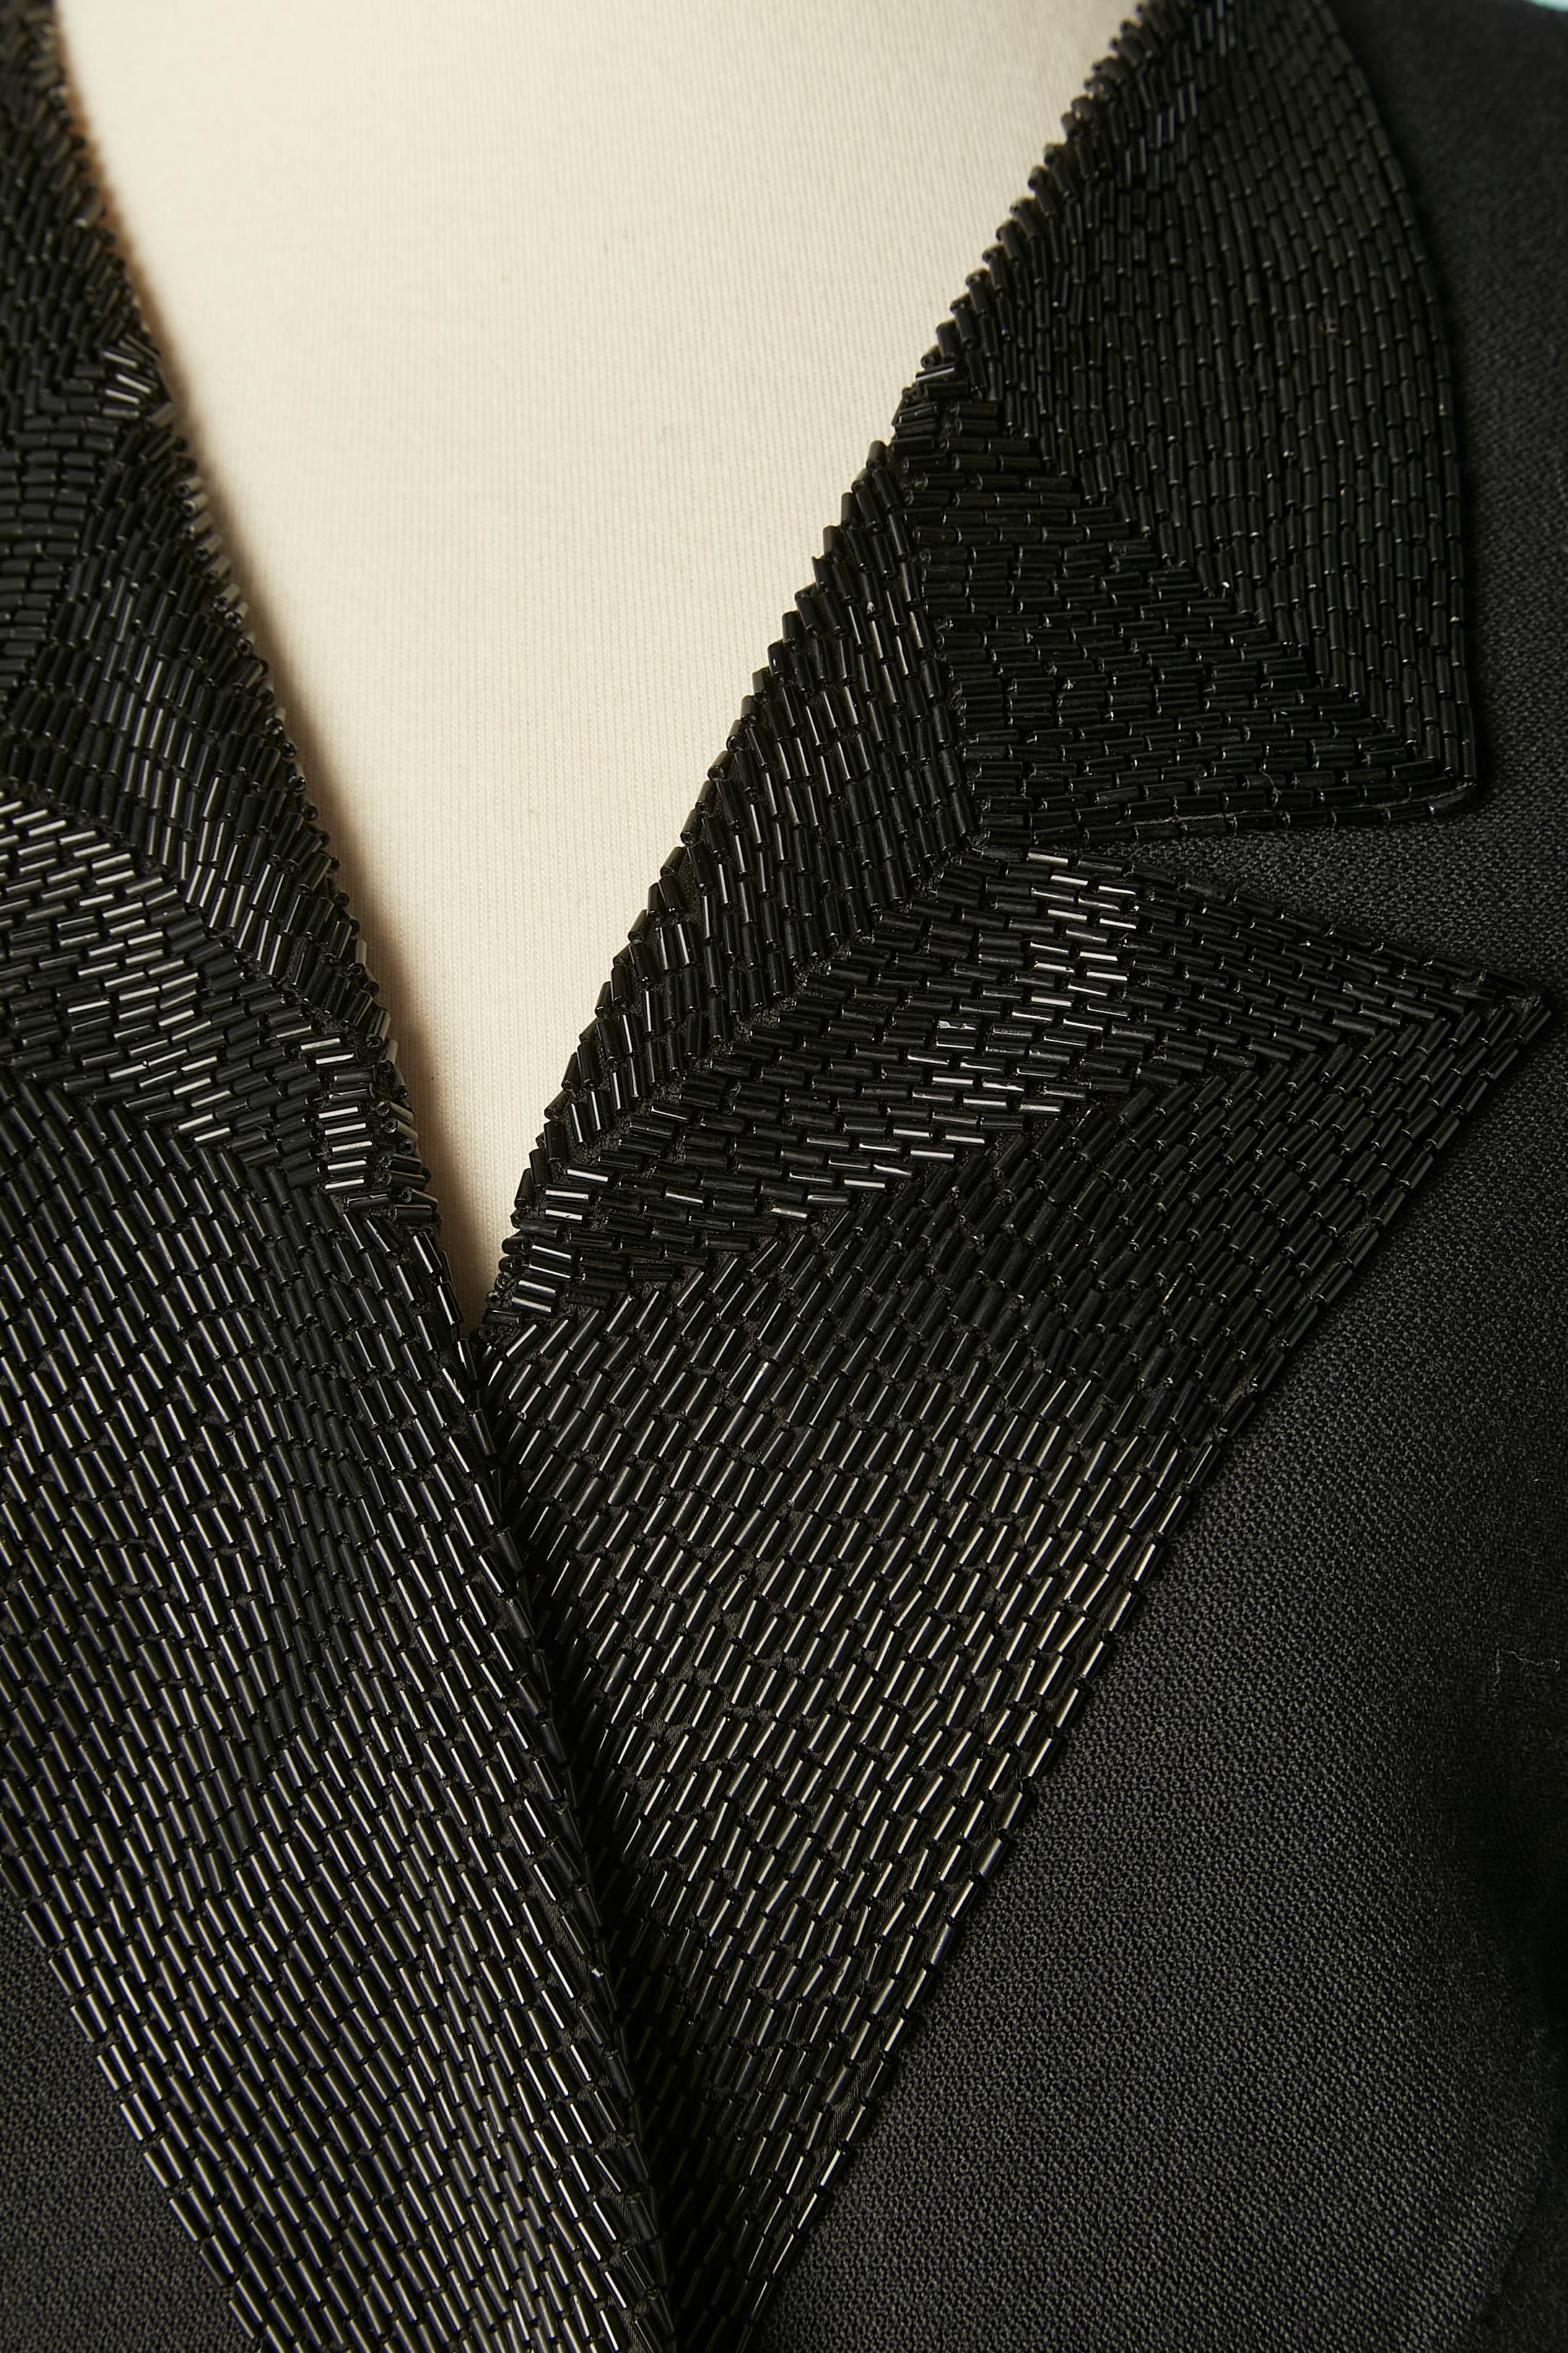 Black wool evening single-breasted jacket with beaded collar and pockets. Double-face fabric so no lining. 